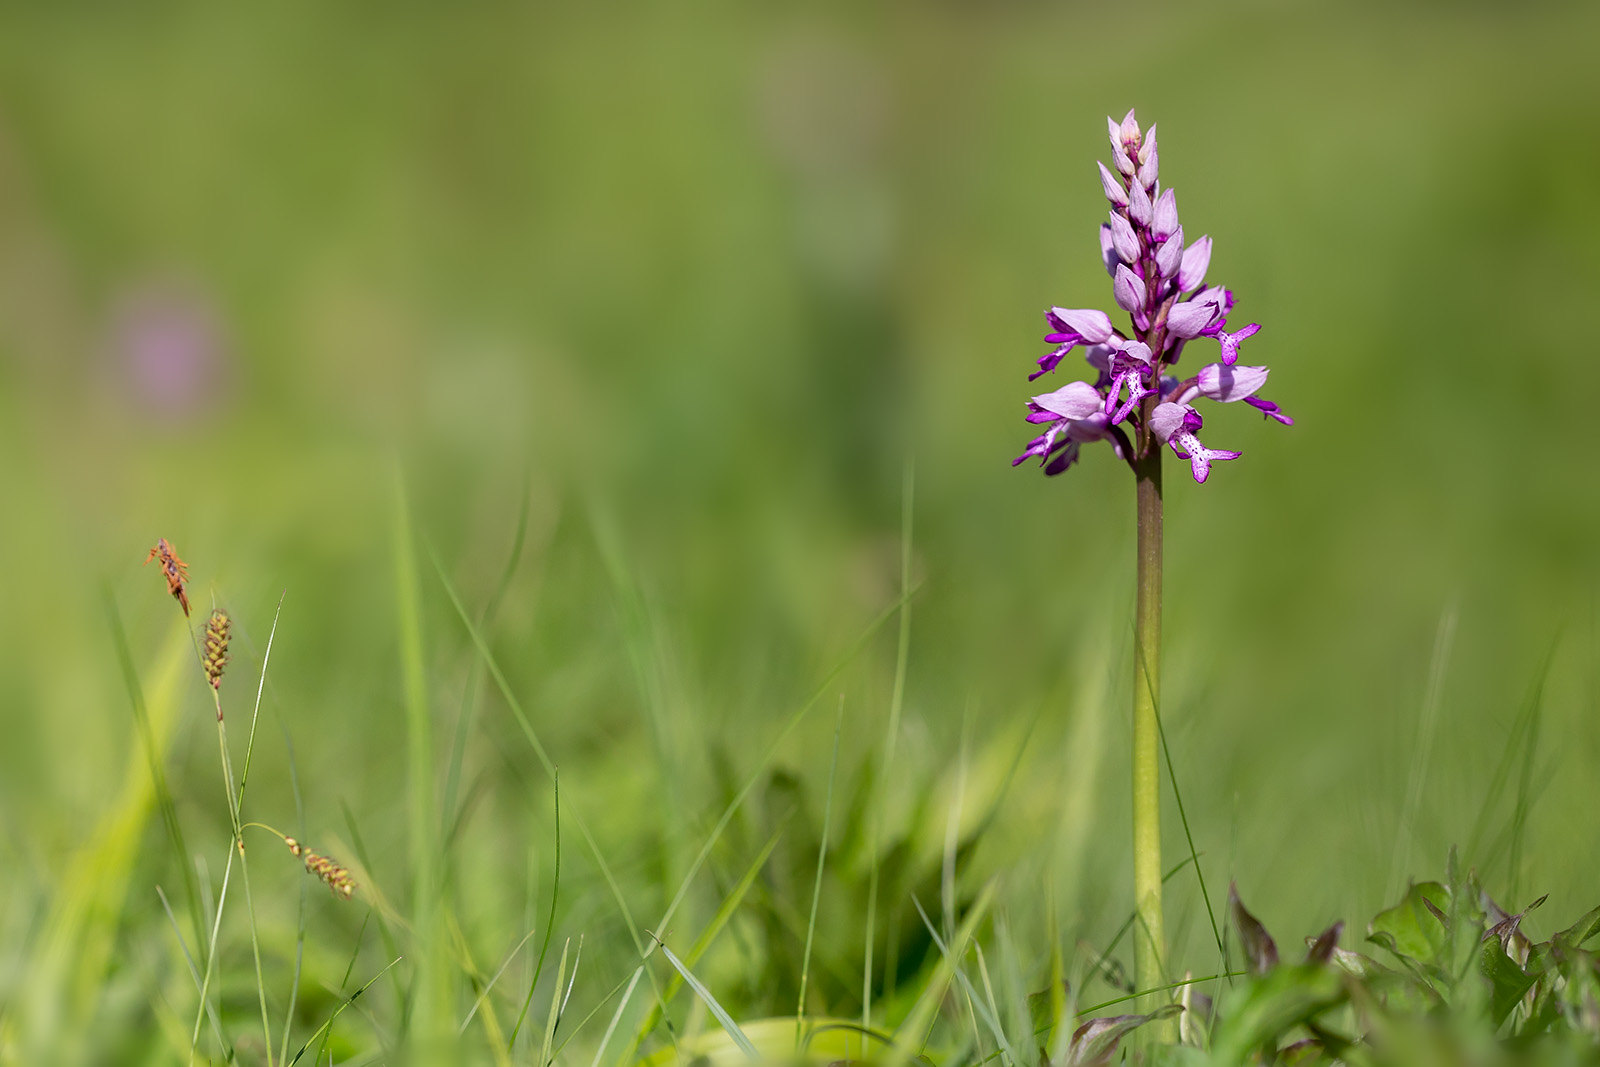 Miltary Orchid on the right hand side of the photo in a field of grass.